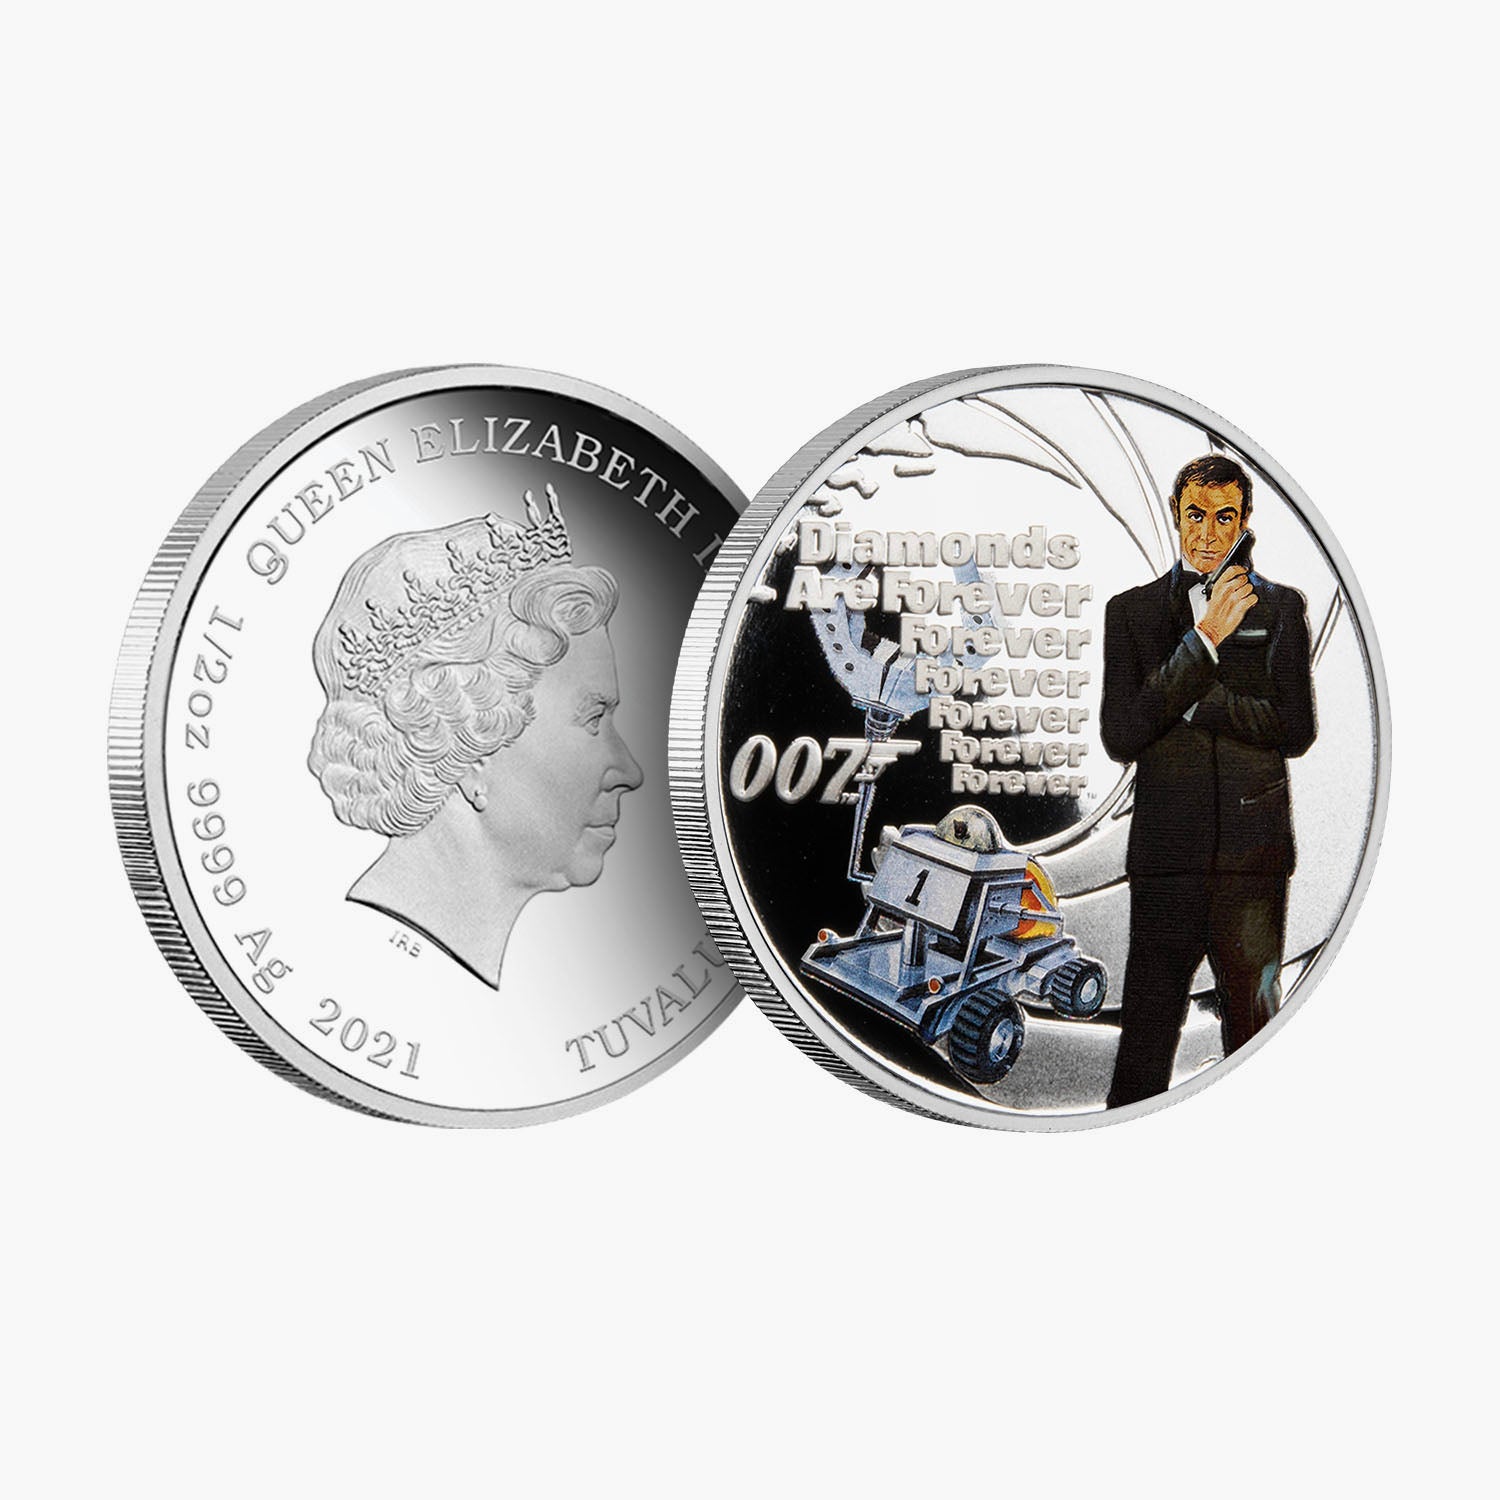 James Bond - Diamonds are Forever Solid Silver Movie Coin